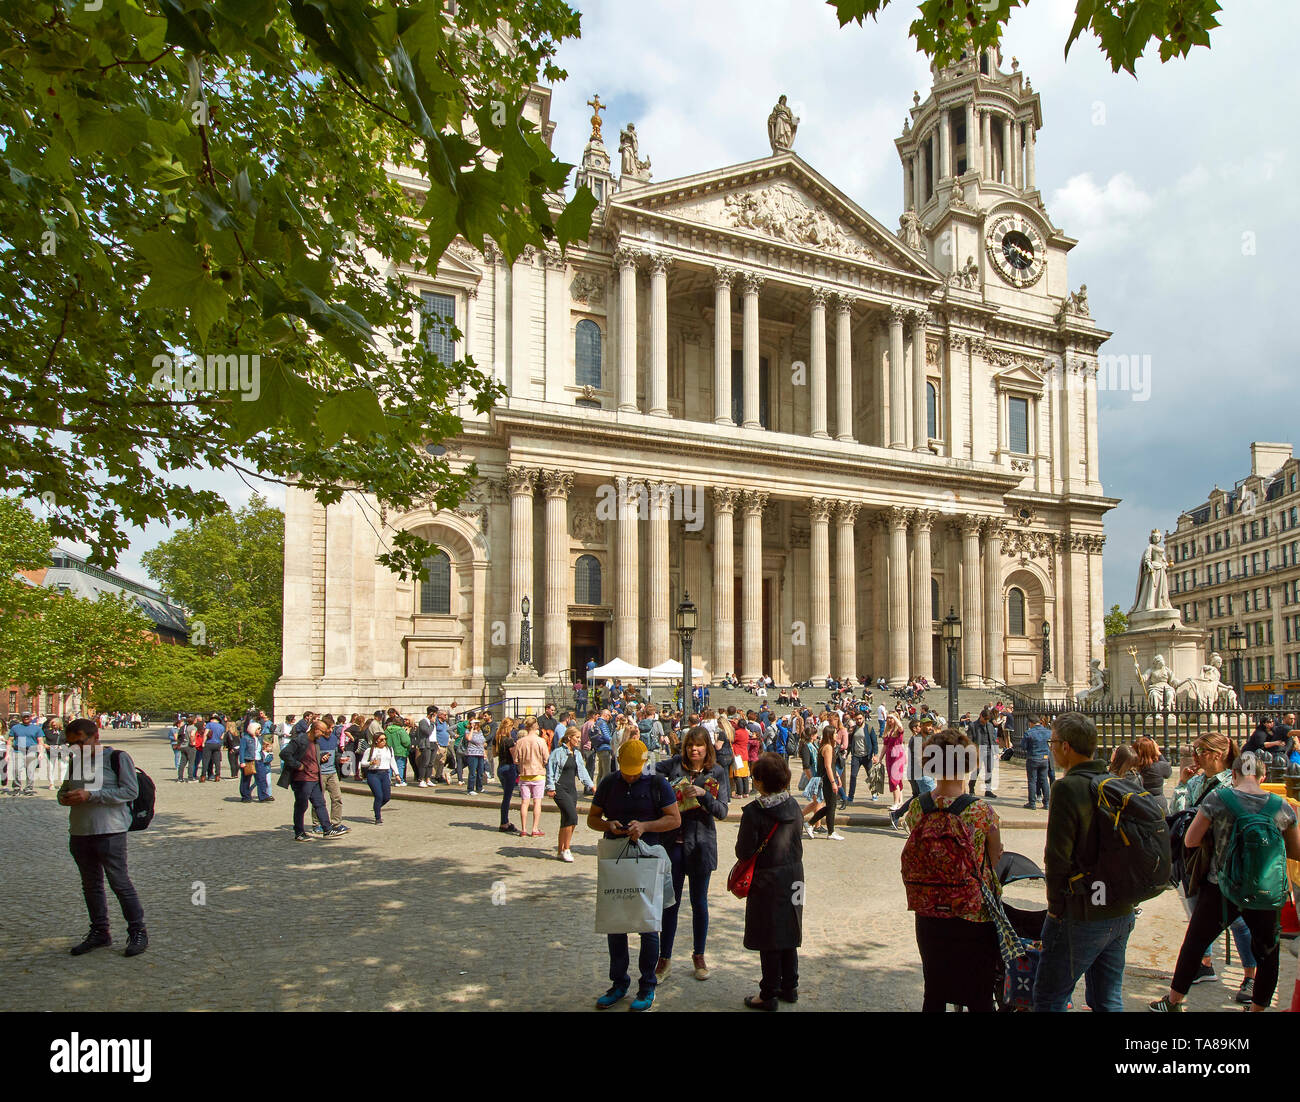 LONDON ST PAULS CATHEDRAL WITH PEOPLE ON THE PAVEMENTS AND THE STEPS Stock Photo